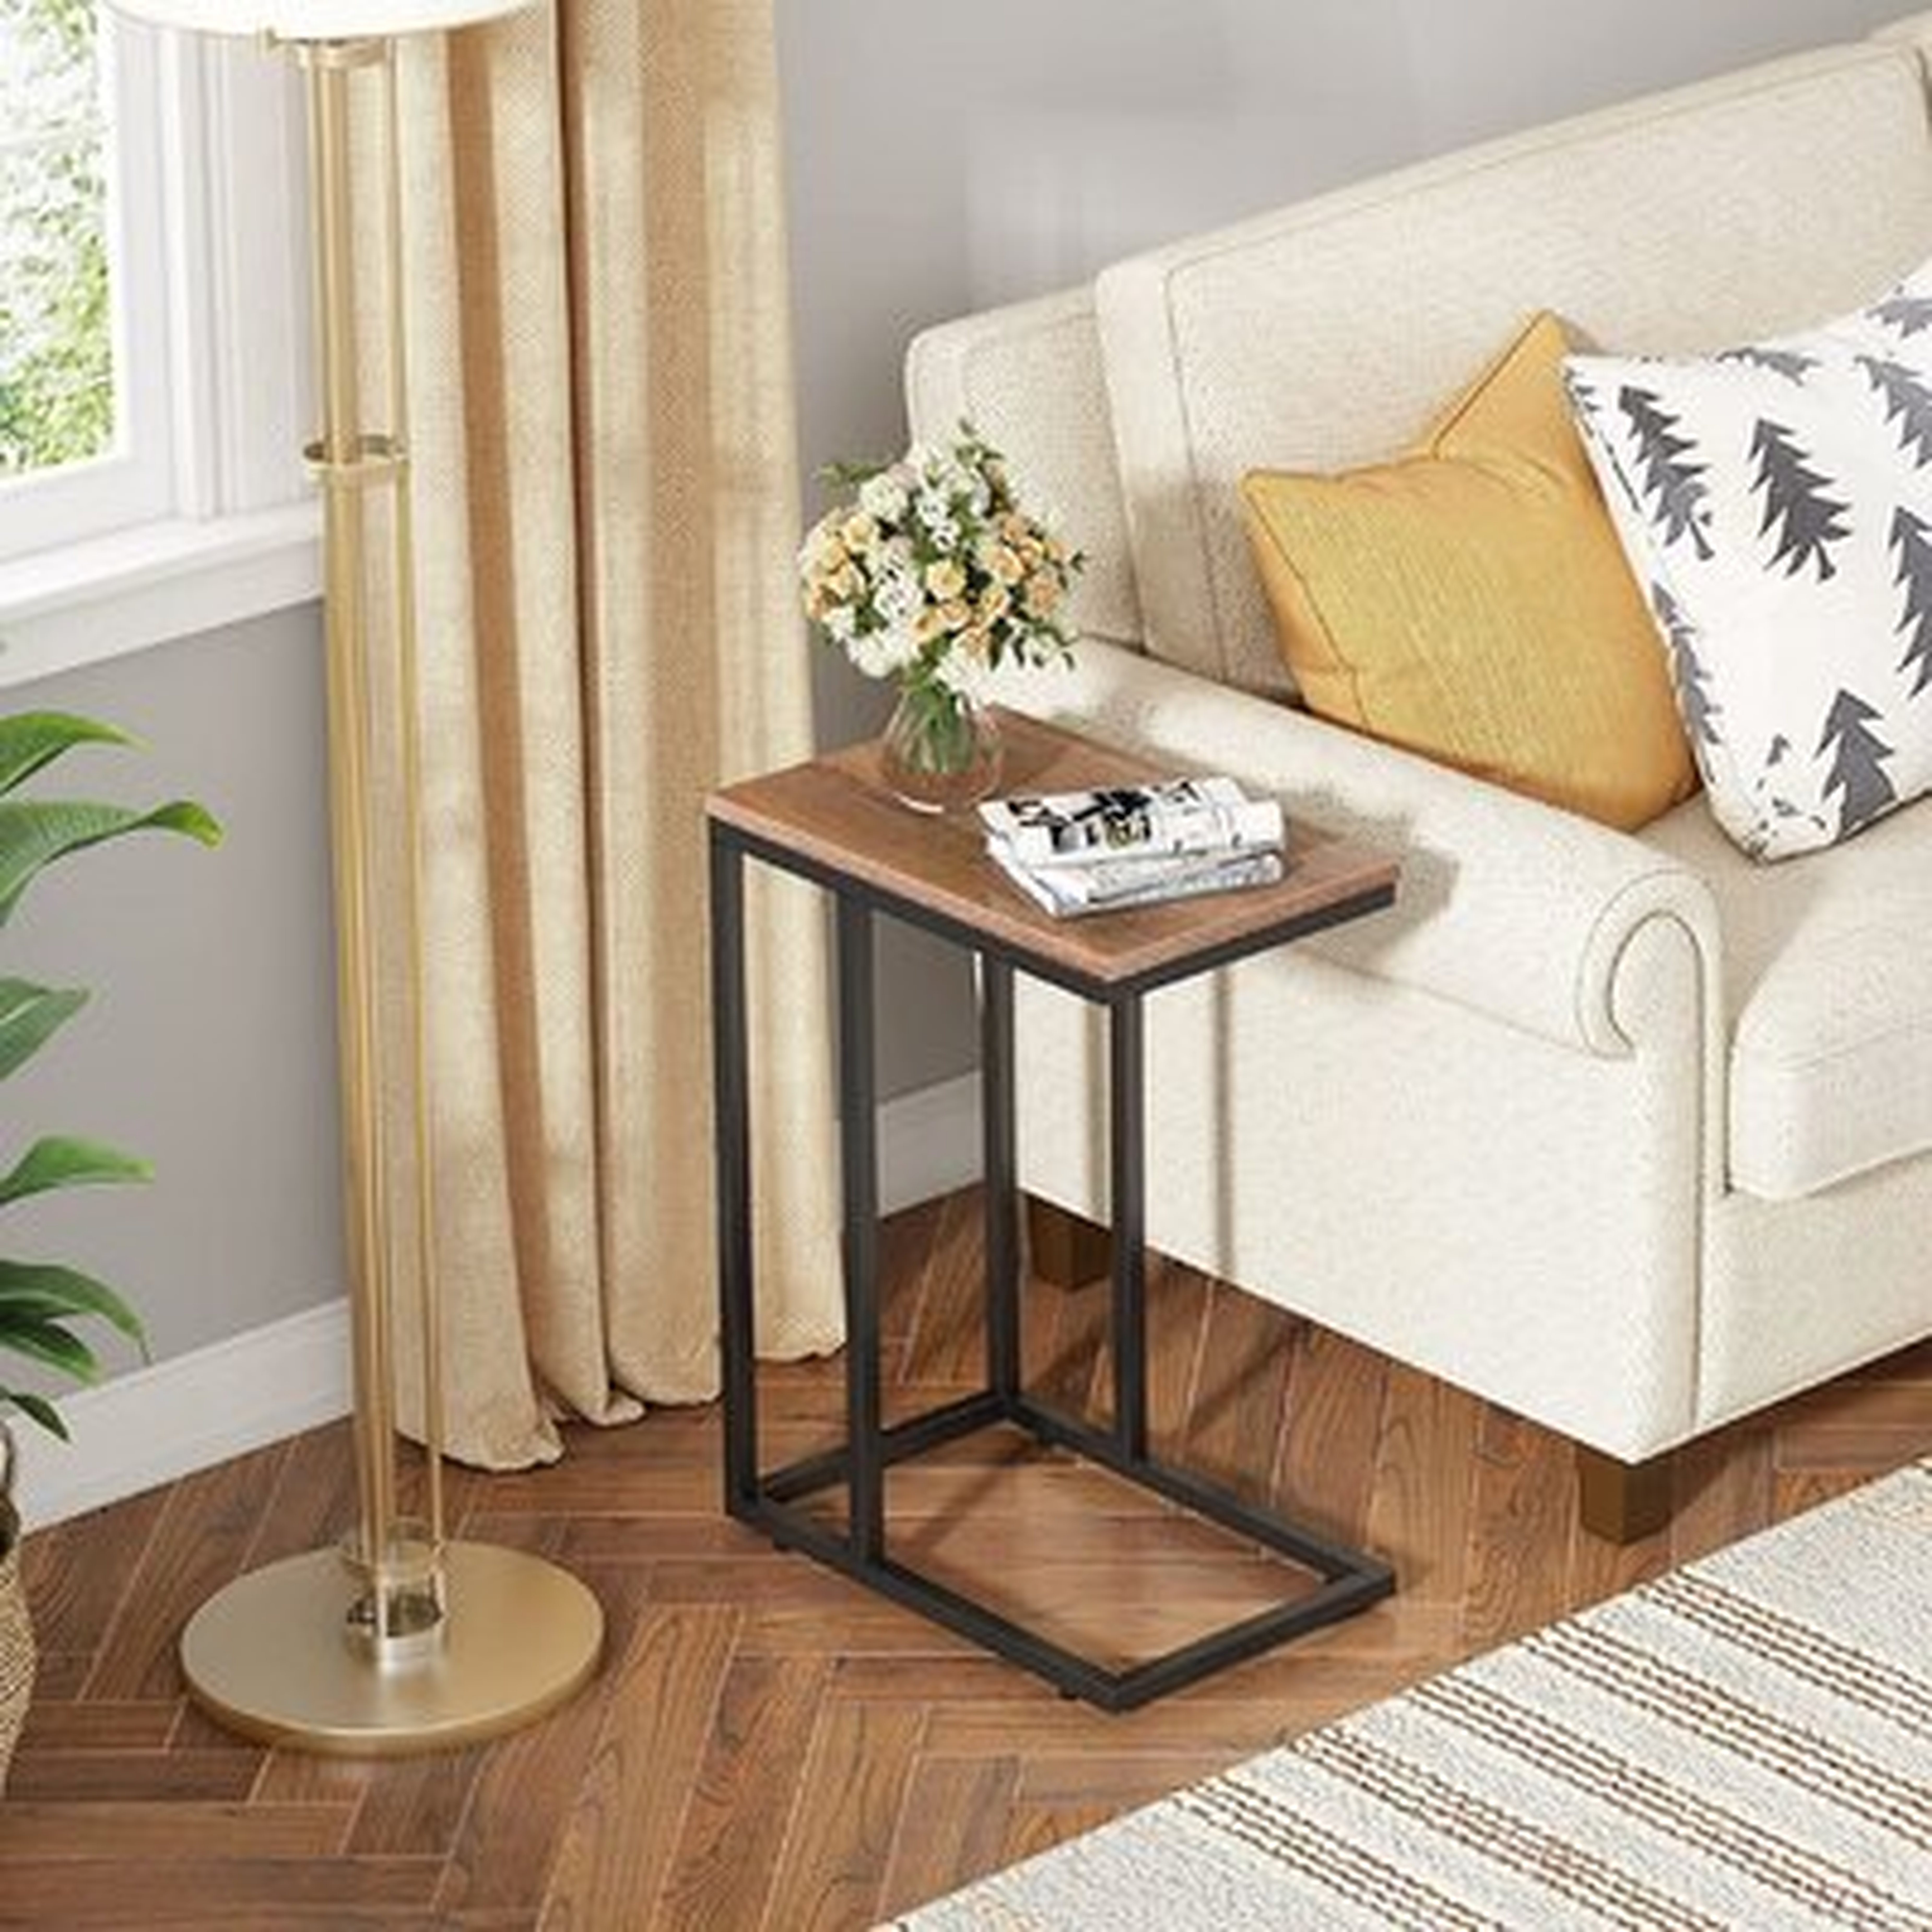 Snack Side Table, C Shaped End Table For Sofa Couch And Bed - Wayfair